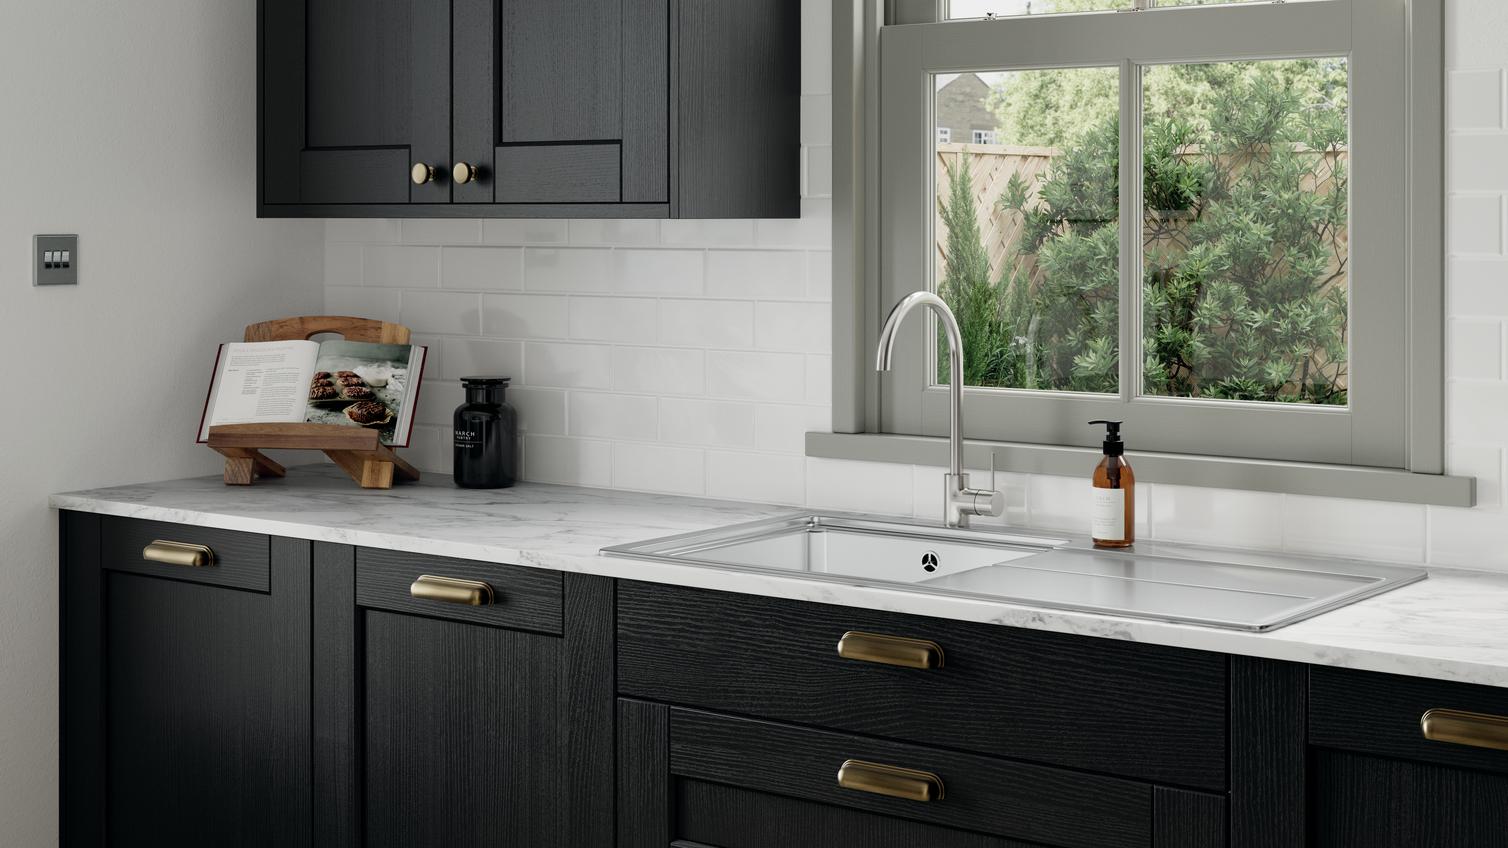 Fairford Charcoal kitchen cabinets with brass handles and grey worktop as an industrial kitchen idea